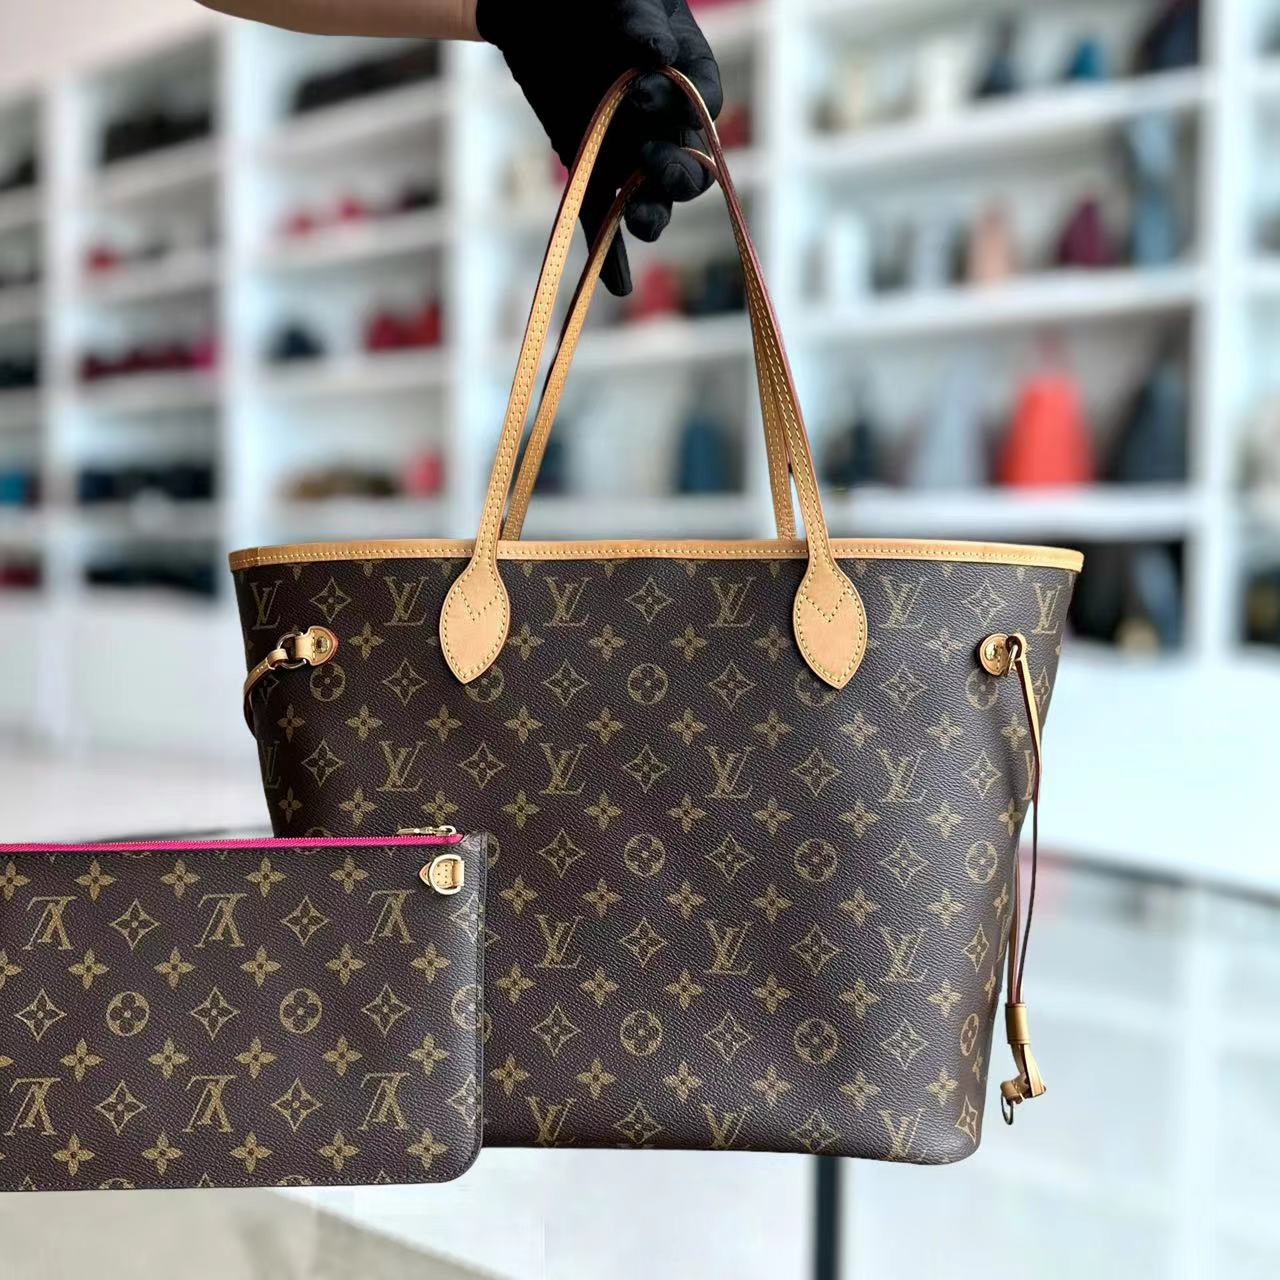 *Microchipped* Louis Vuitton LV Neverfull MM Monogram Canvas Leather